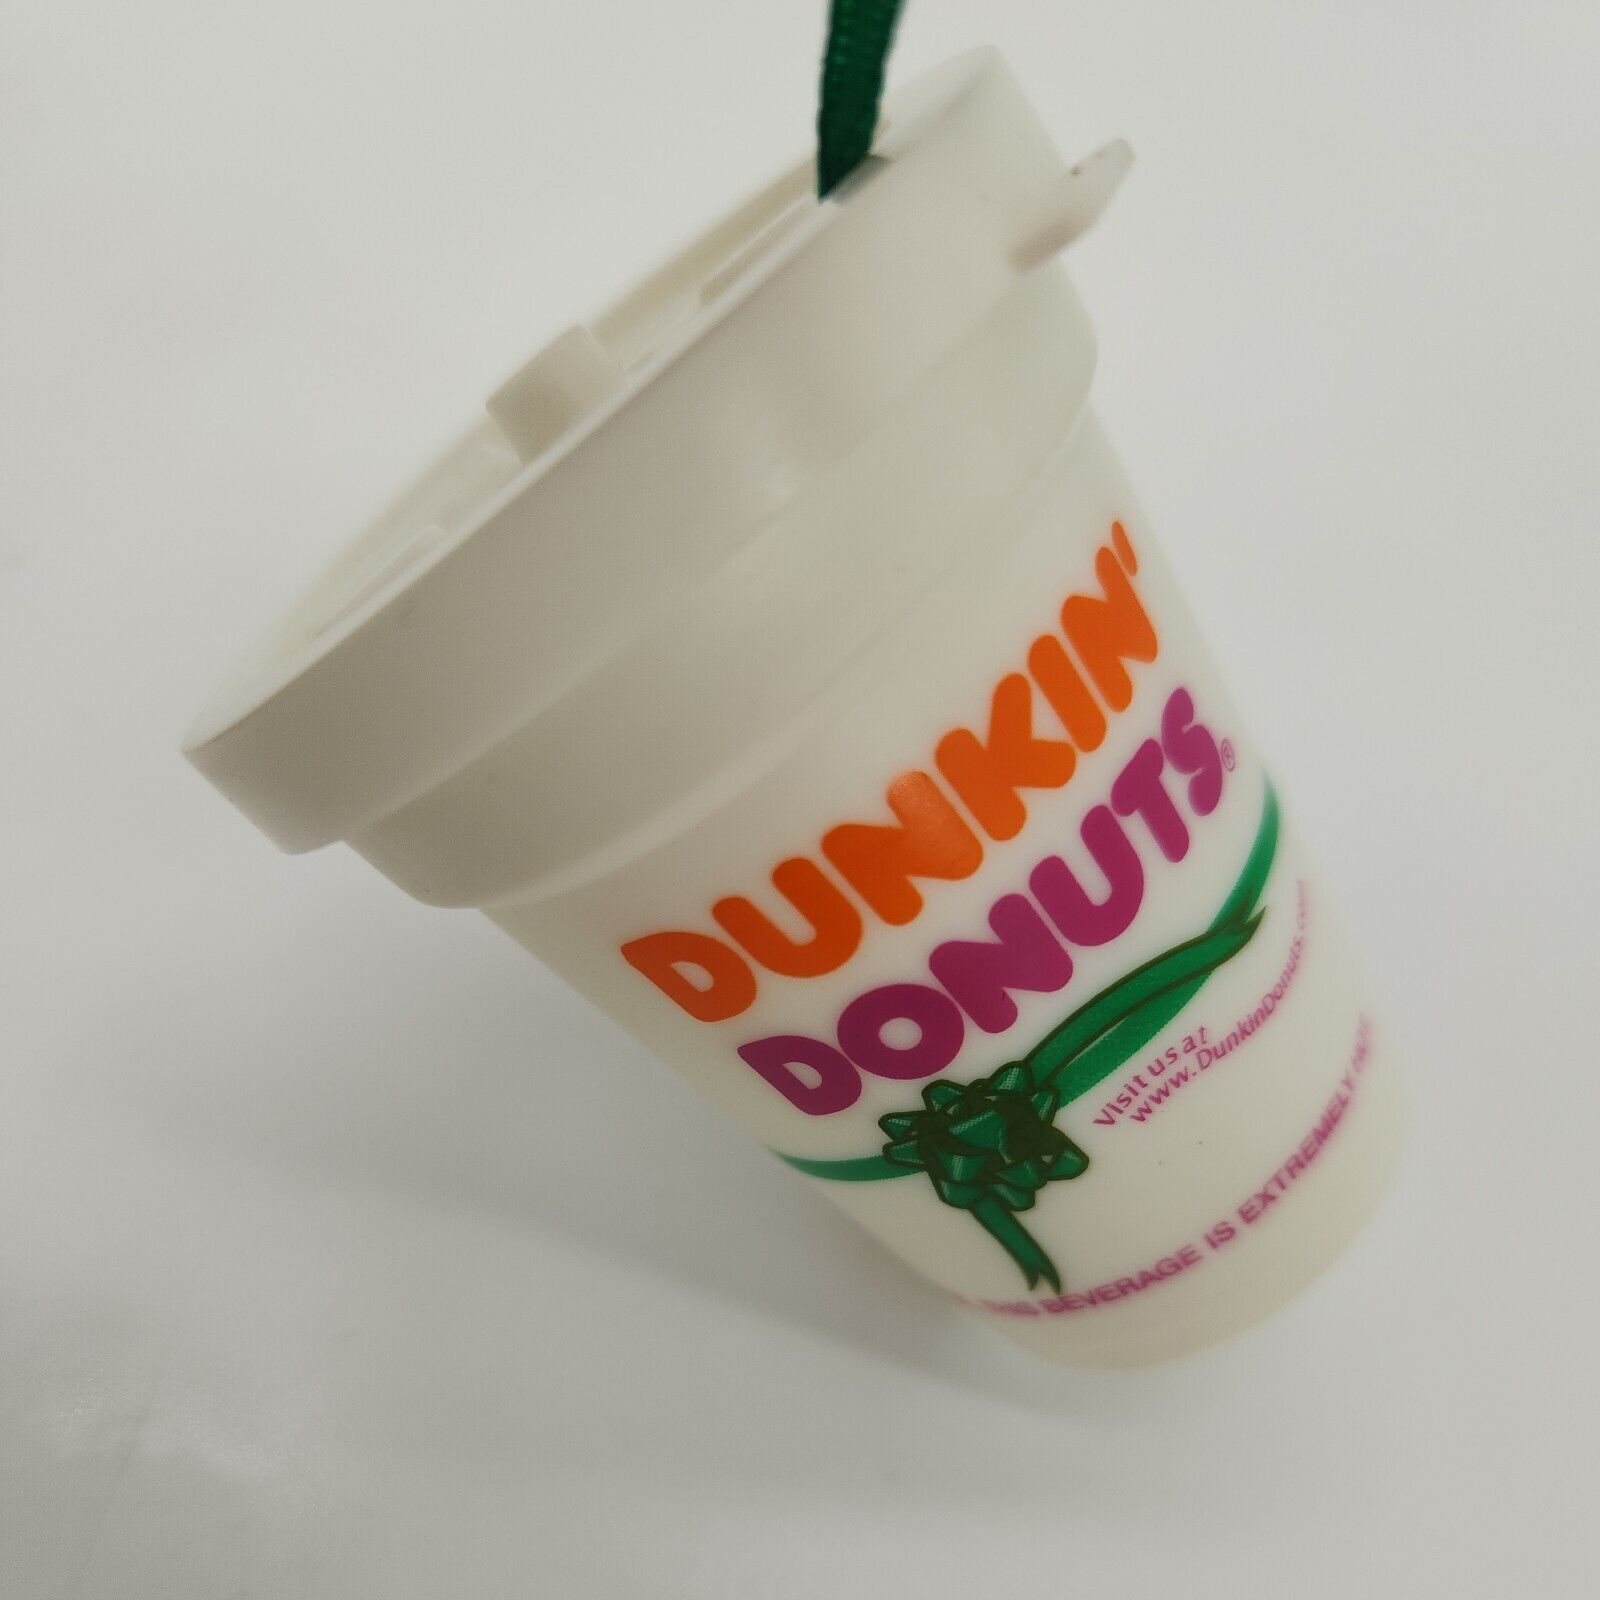 2001 Dunkin' Donuts Christmas Tree Ornament Collector Holiday Coffee Cup Vintage